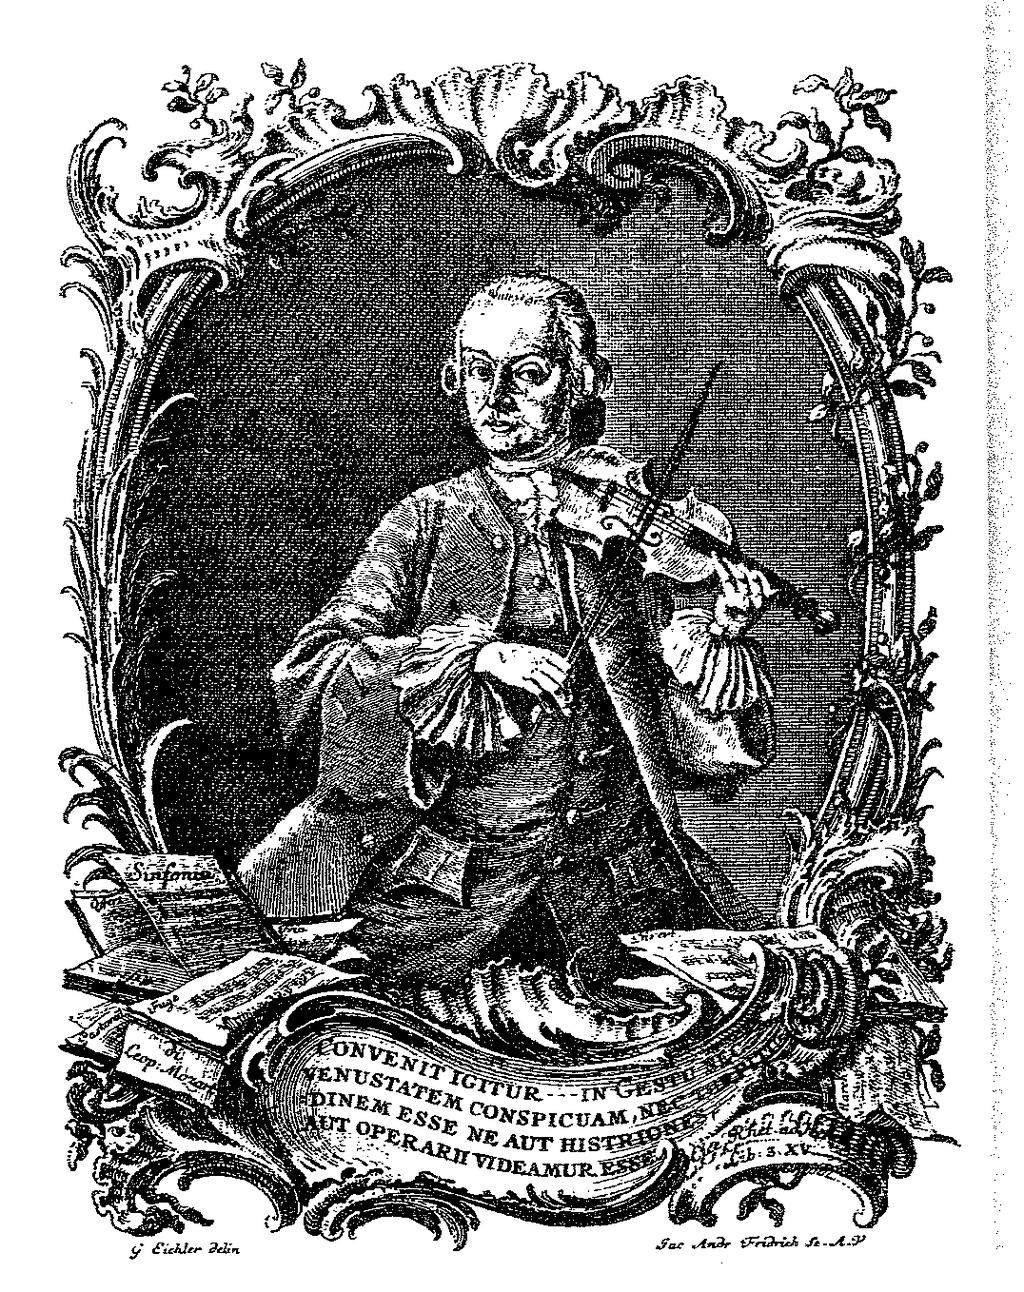 An appropriate way of holding the Baroque violin and bow by the violin master